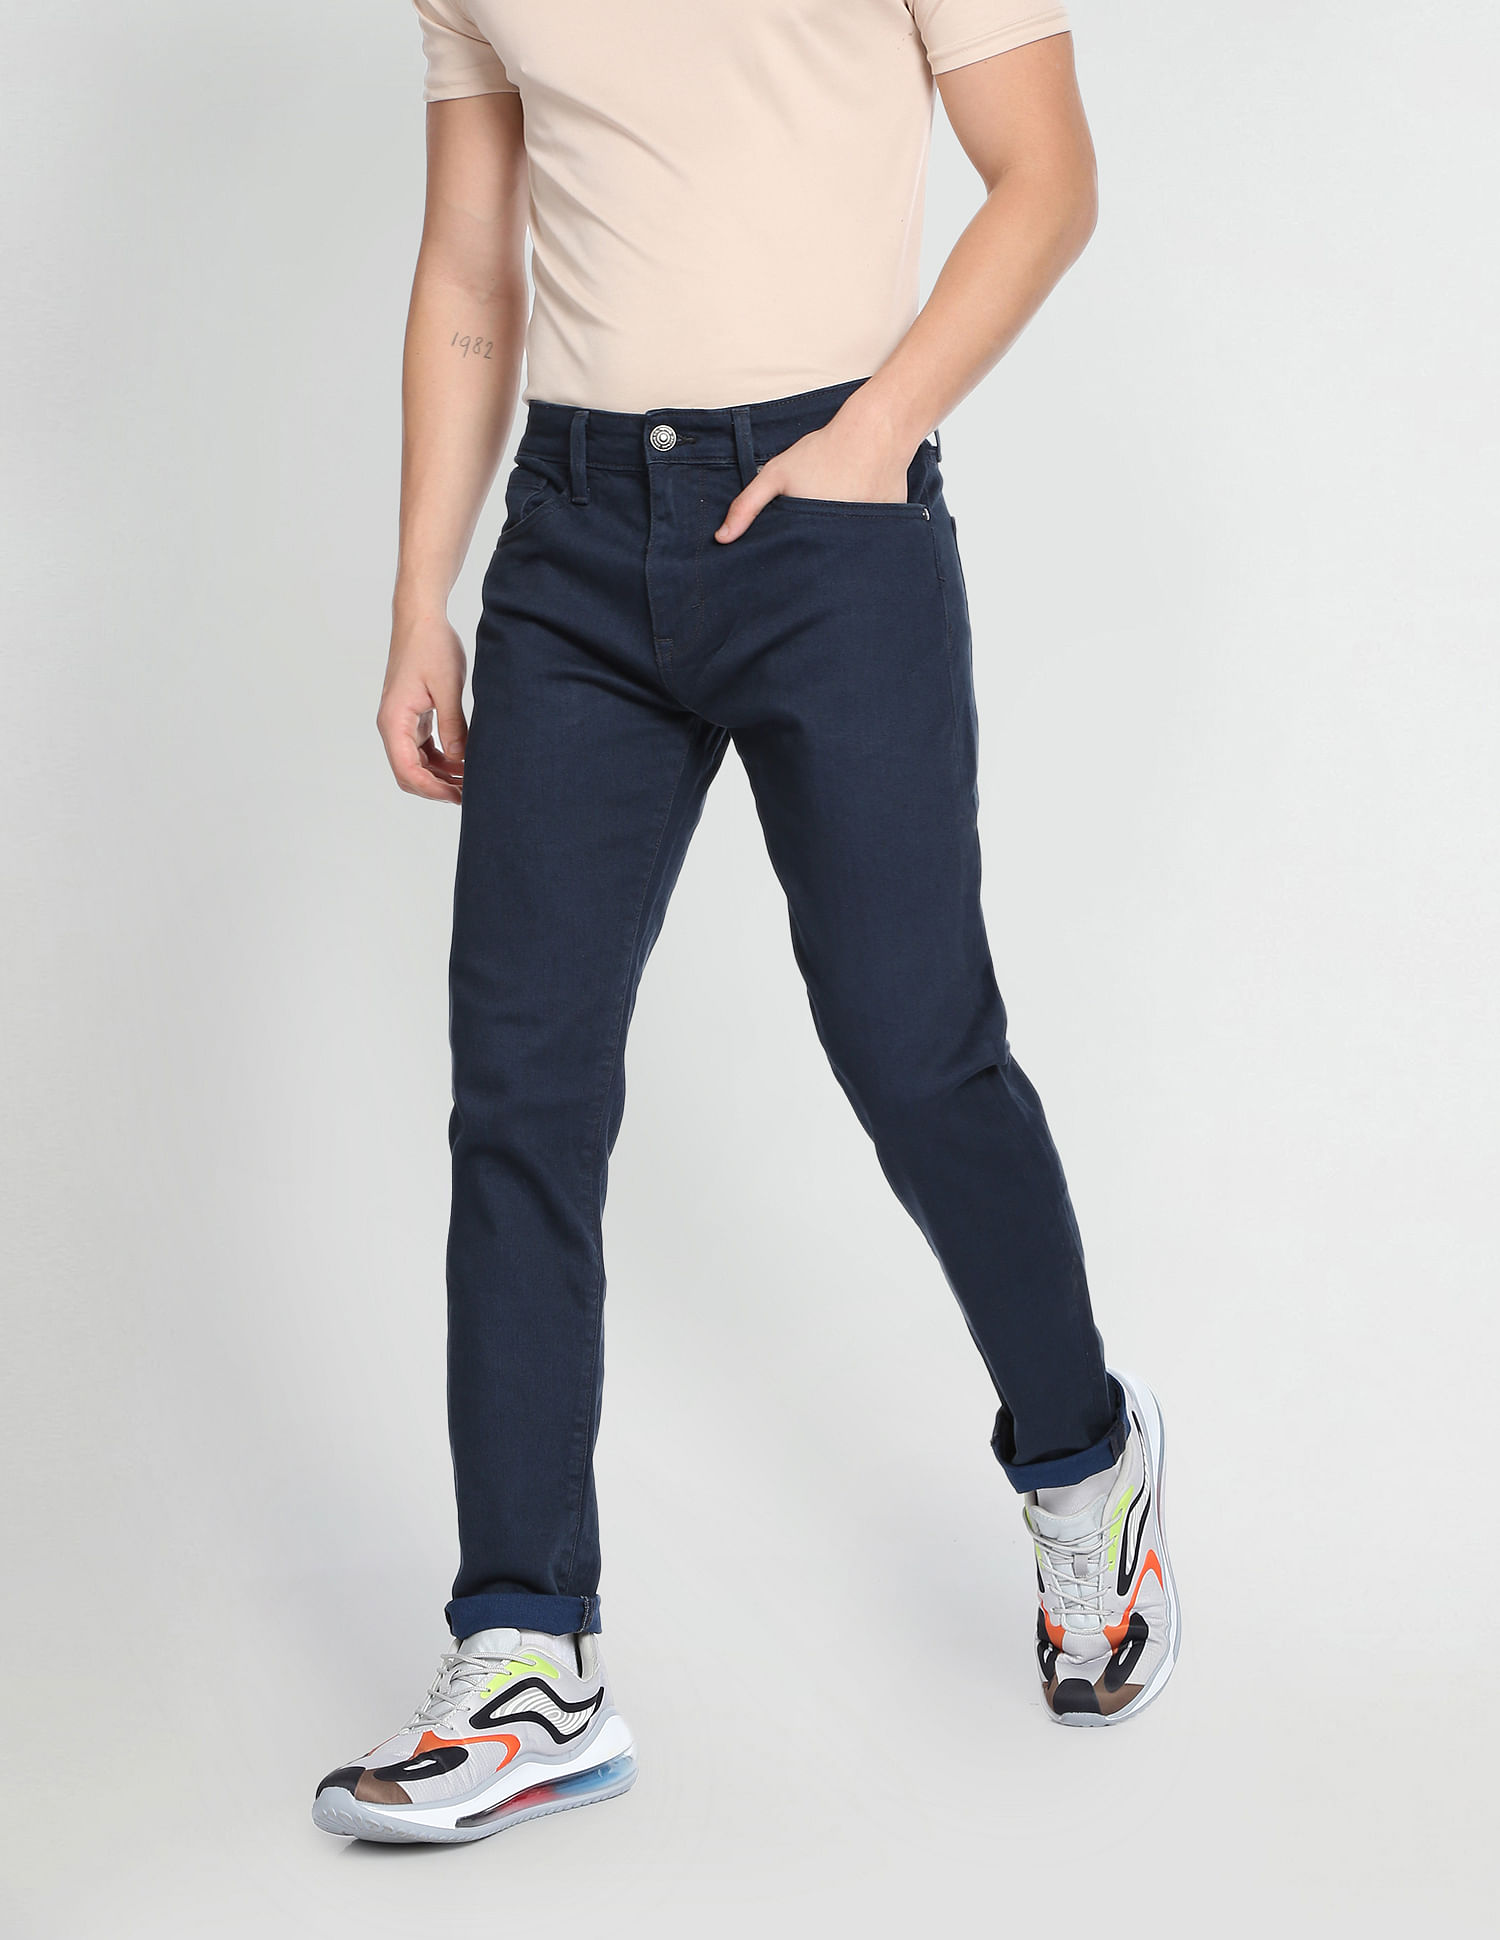 Levis Mens Skinny Tapered Jeans